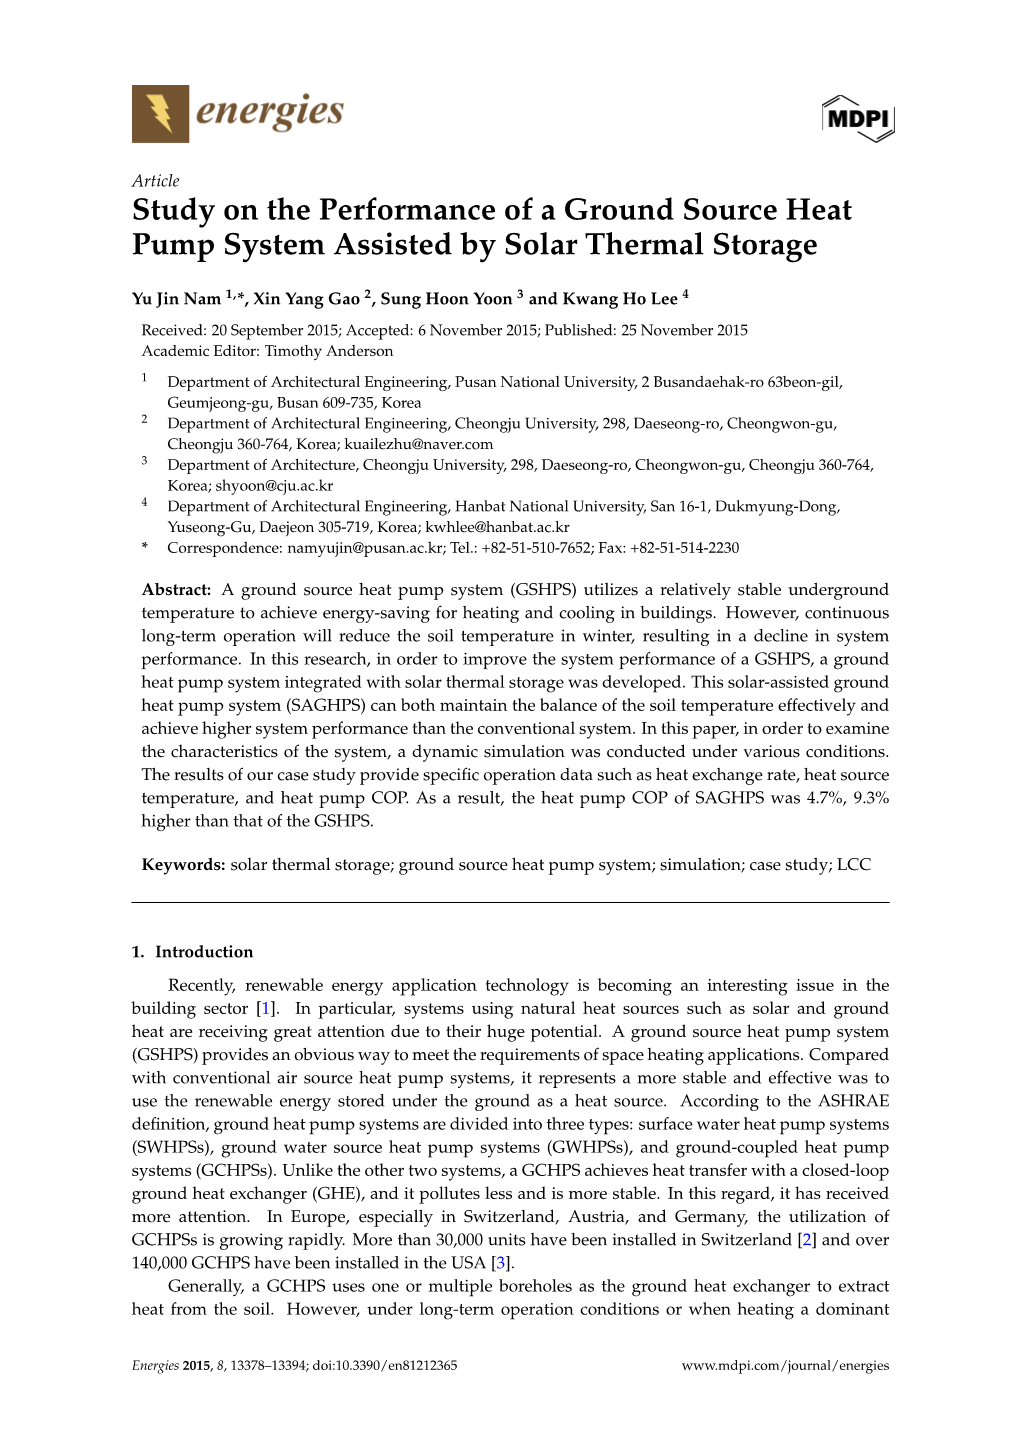 Study on the Performance of a Ground Source Heat Pump System Assisted by Solar Thermal Storage